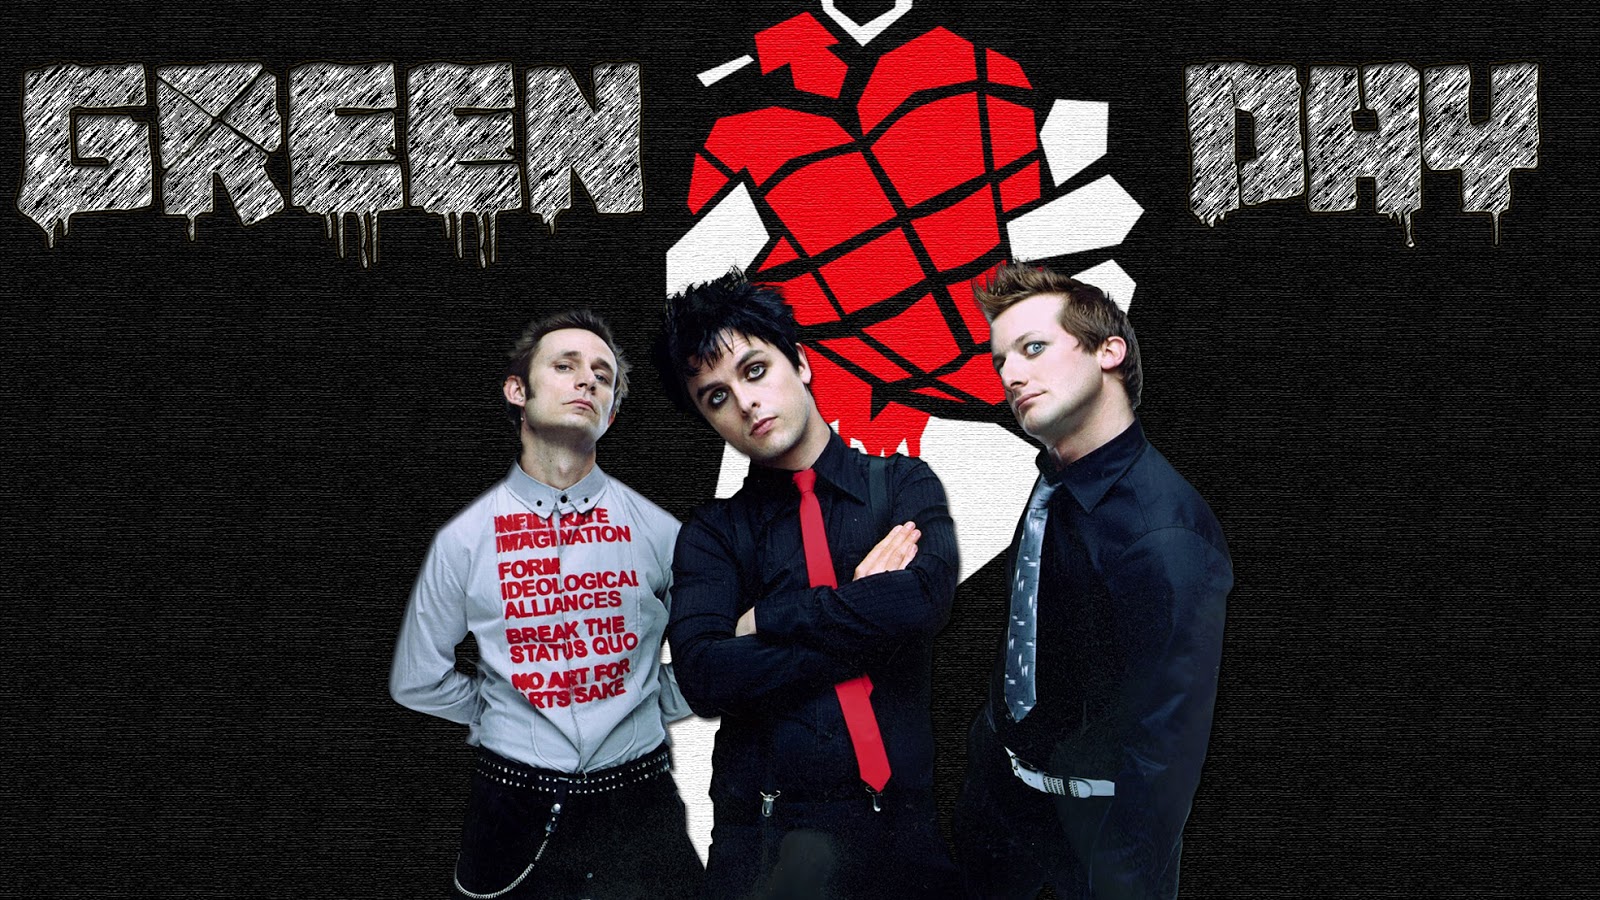 green day pictures green day hd wallpaper green day images